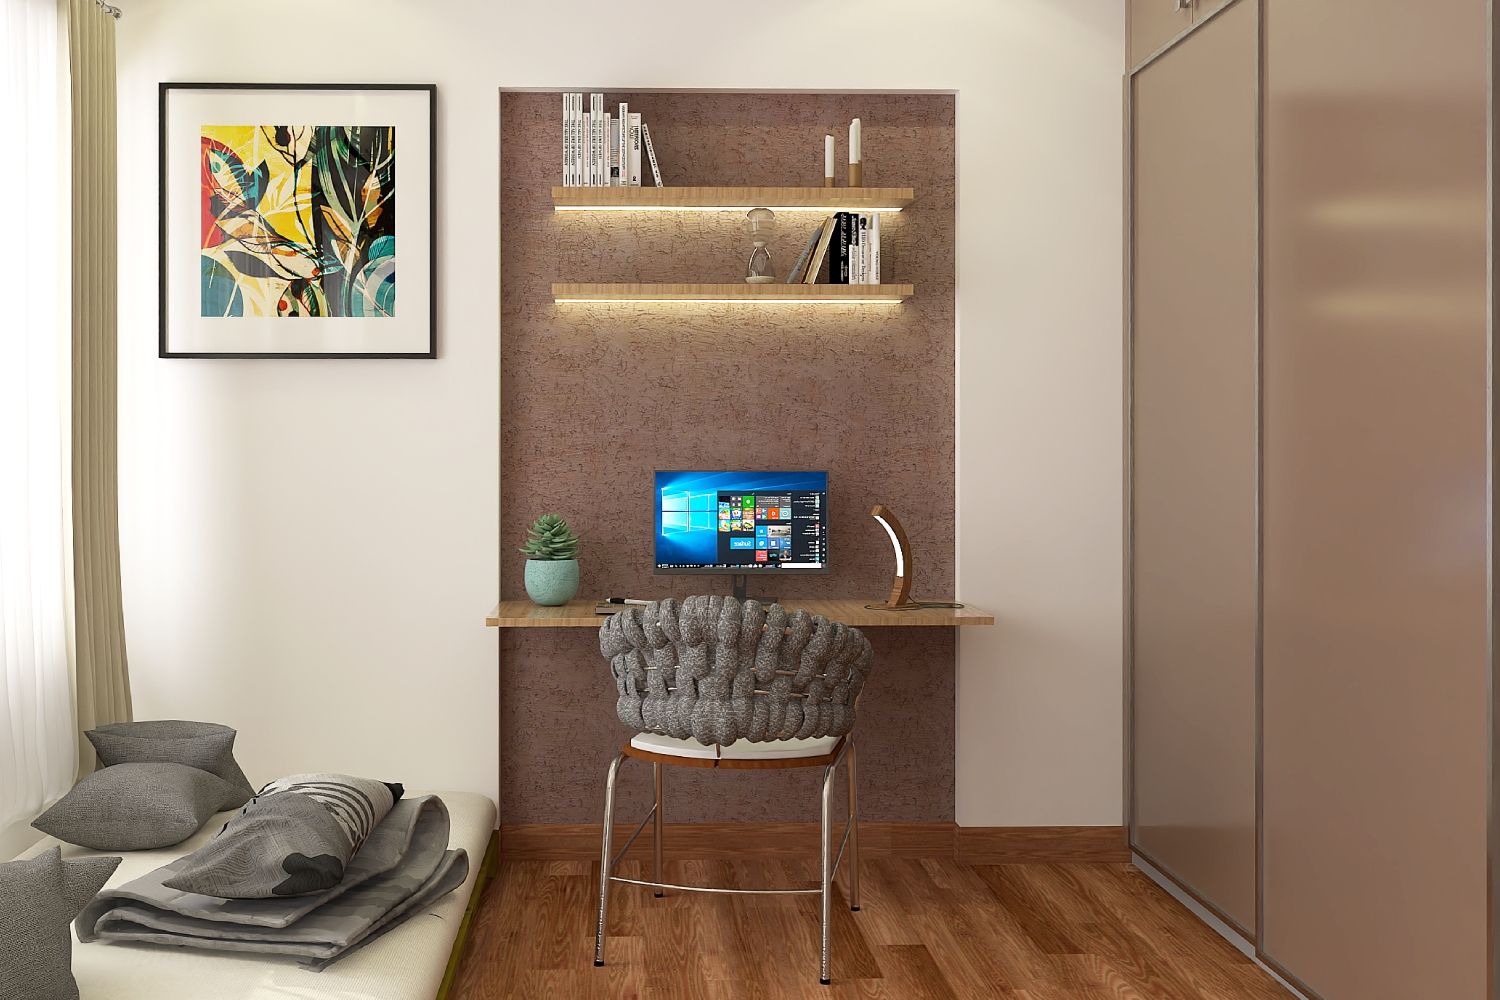 Contemporary Study Room Design With Wall-Niche Study Table